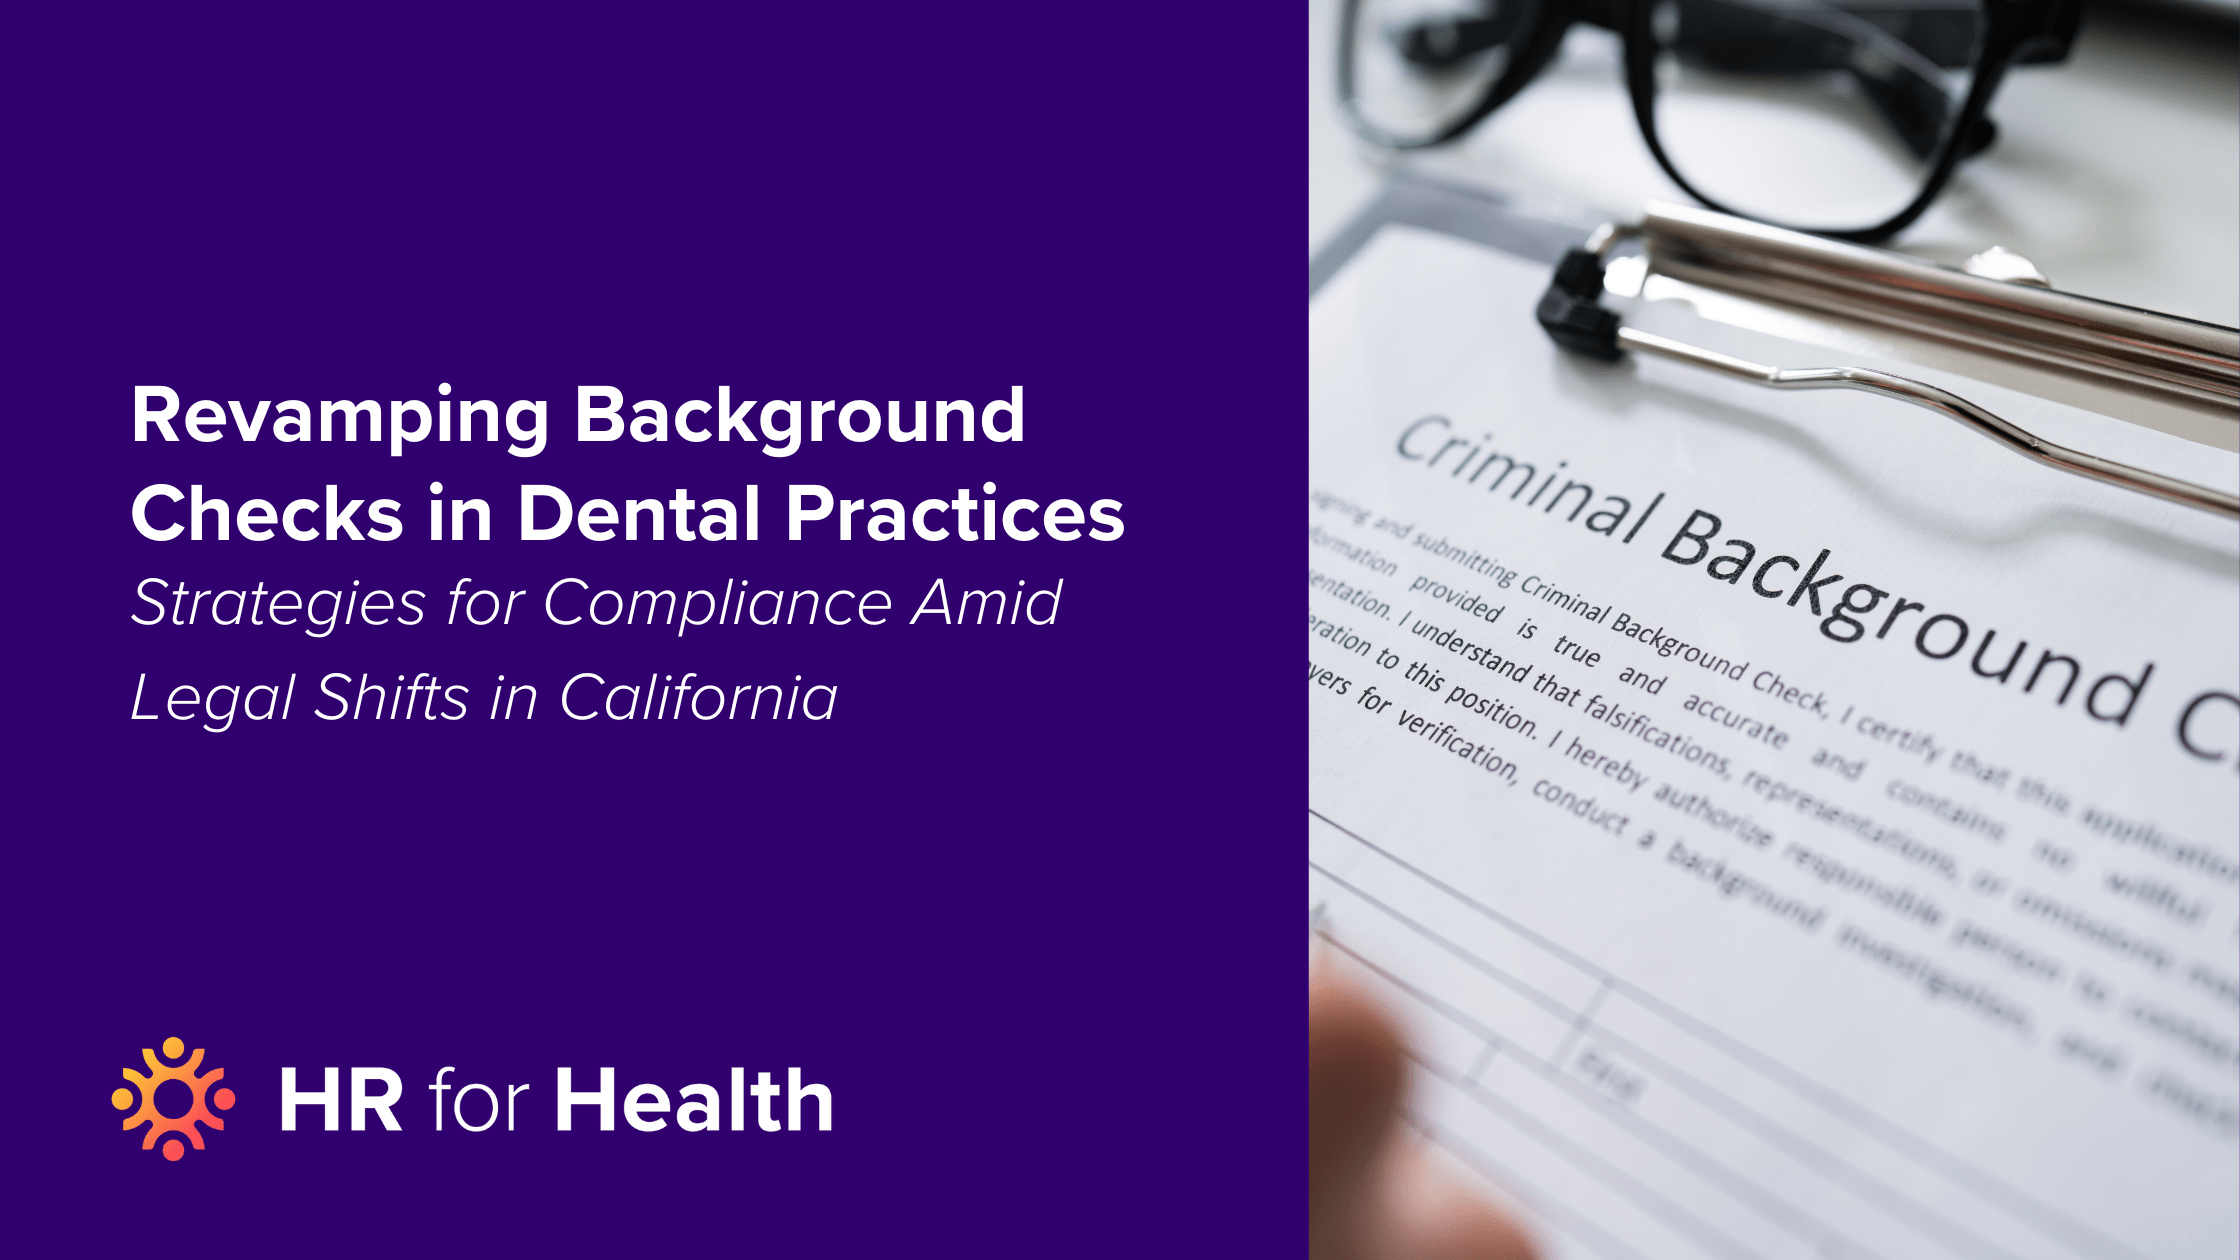 Conducting Background Checks in Dental